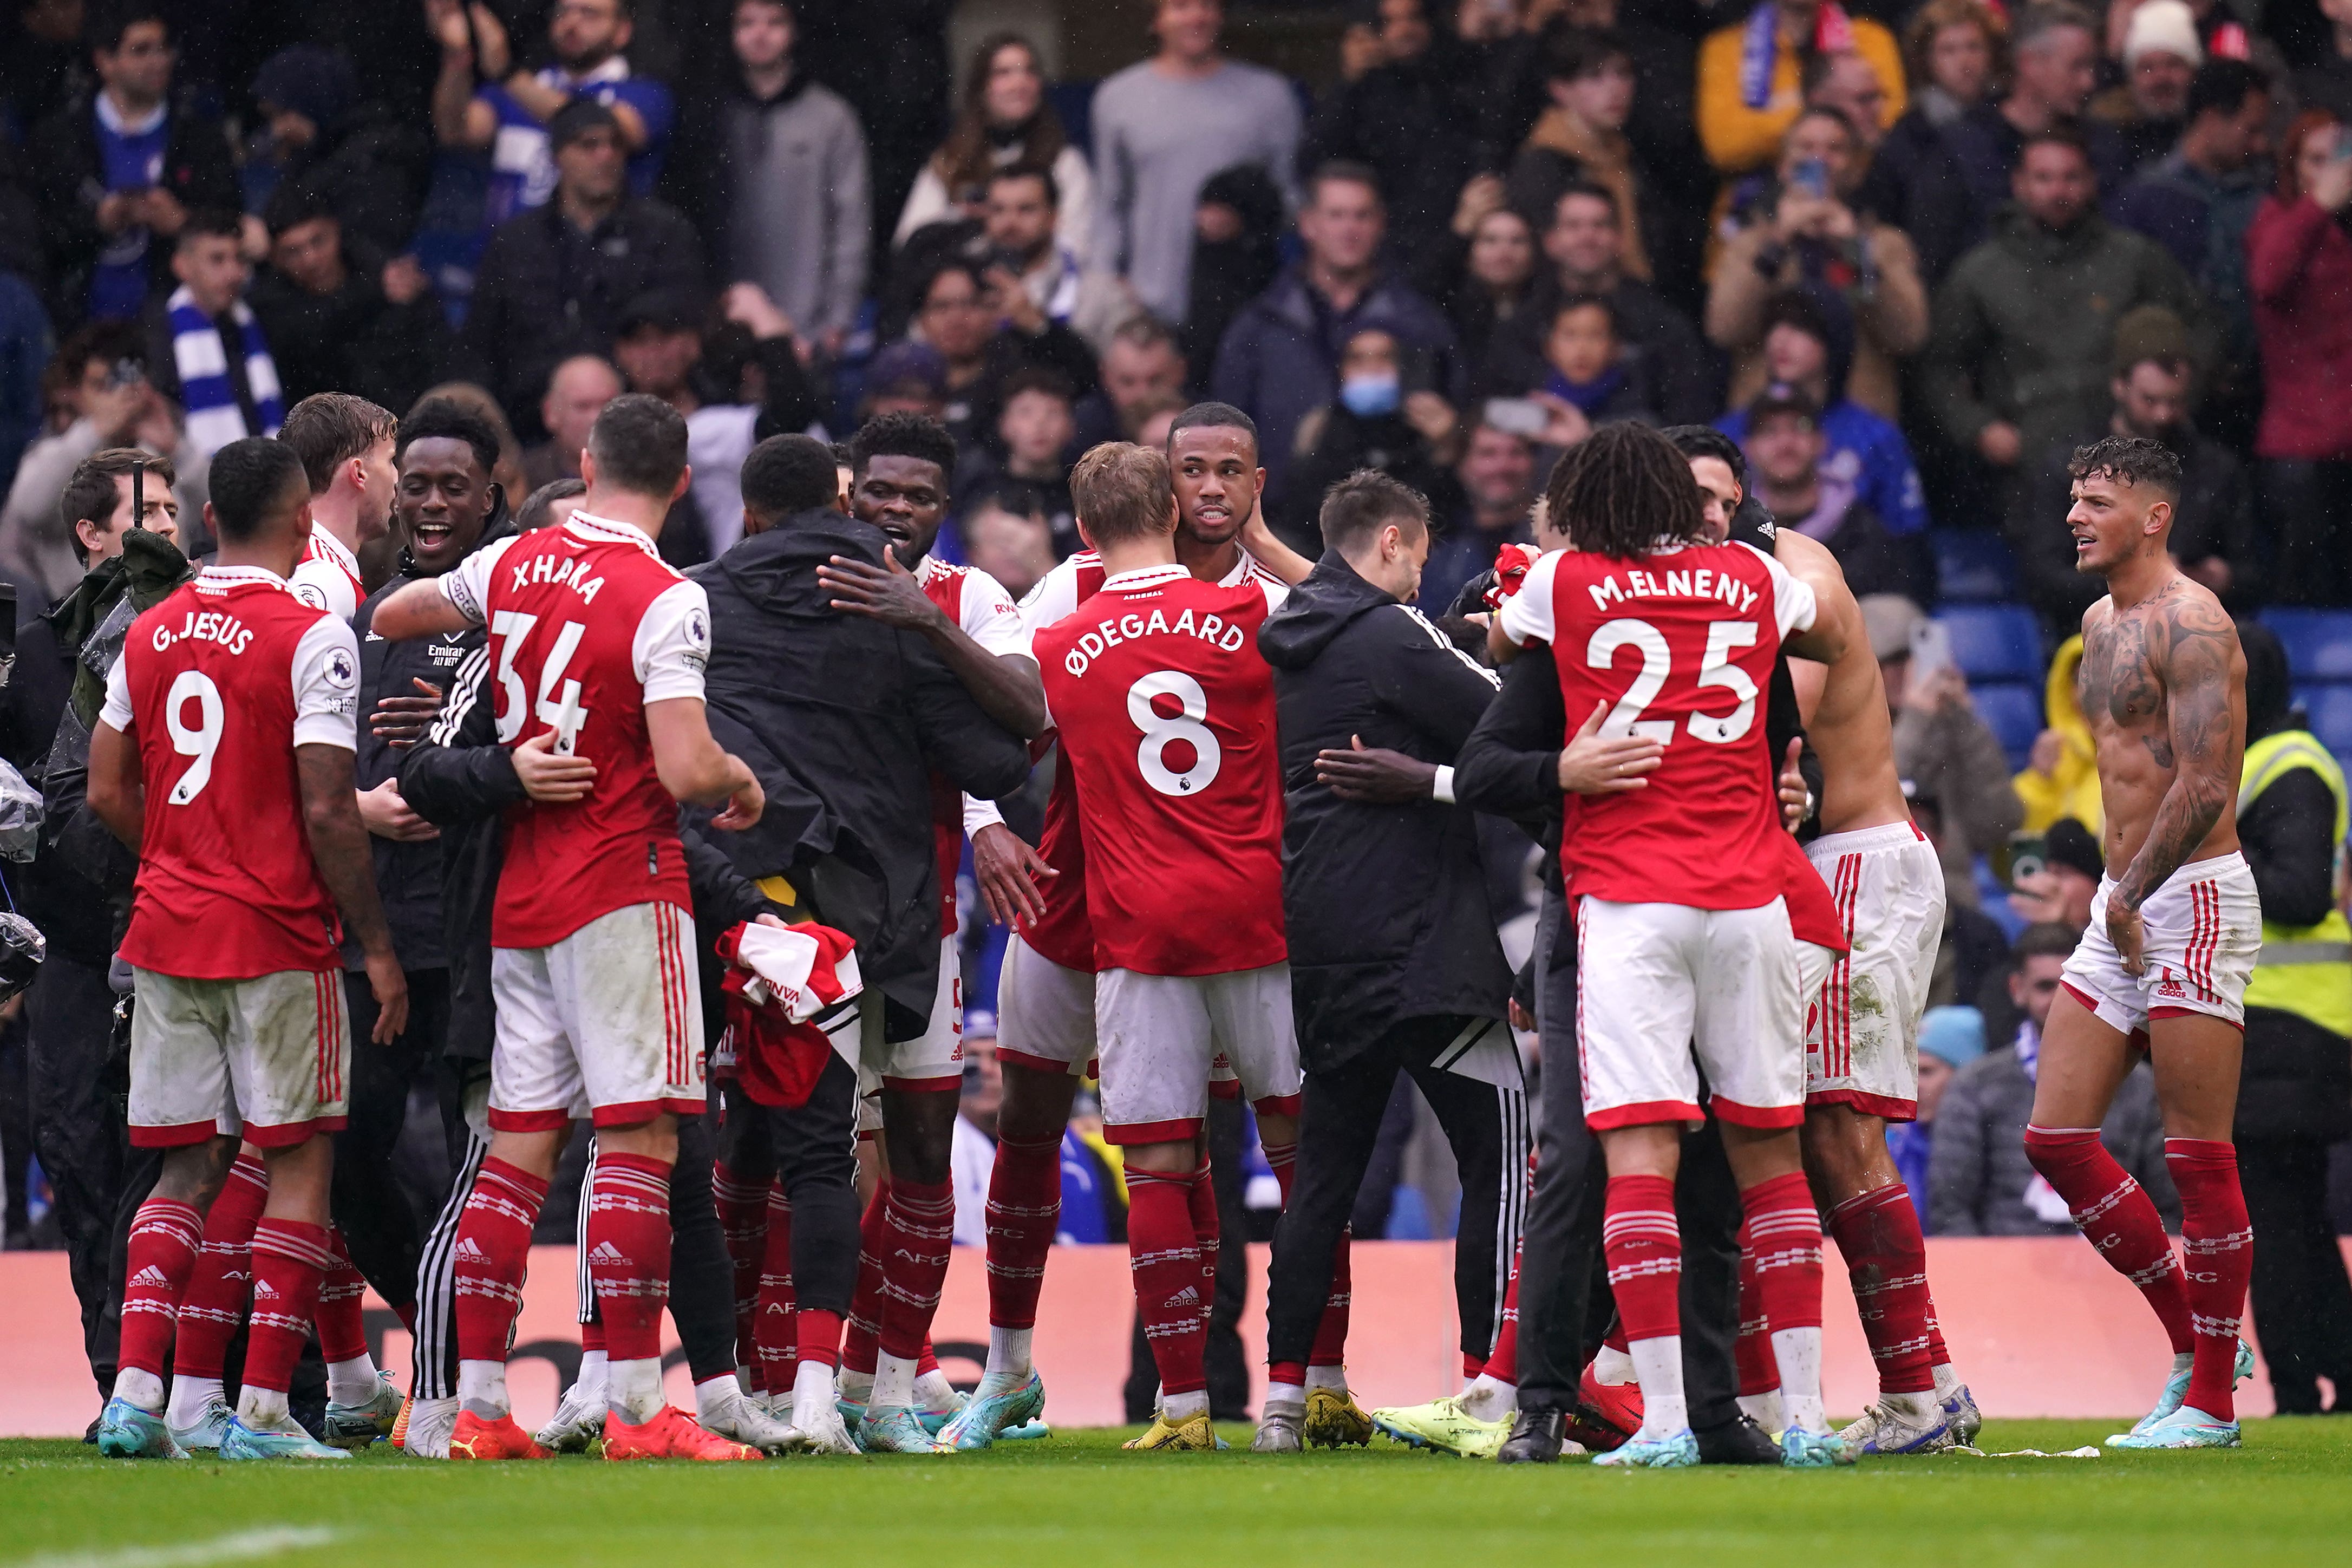 Arsenal’s players celebrate after their 1-0 win at Chelsea (John Walton/PA)